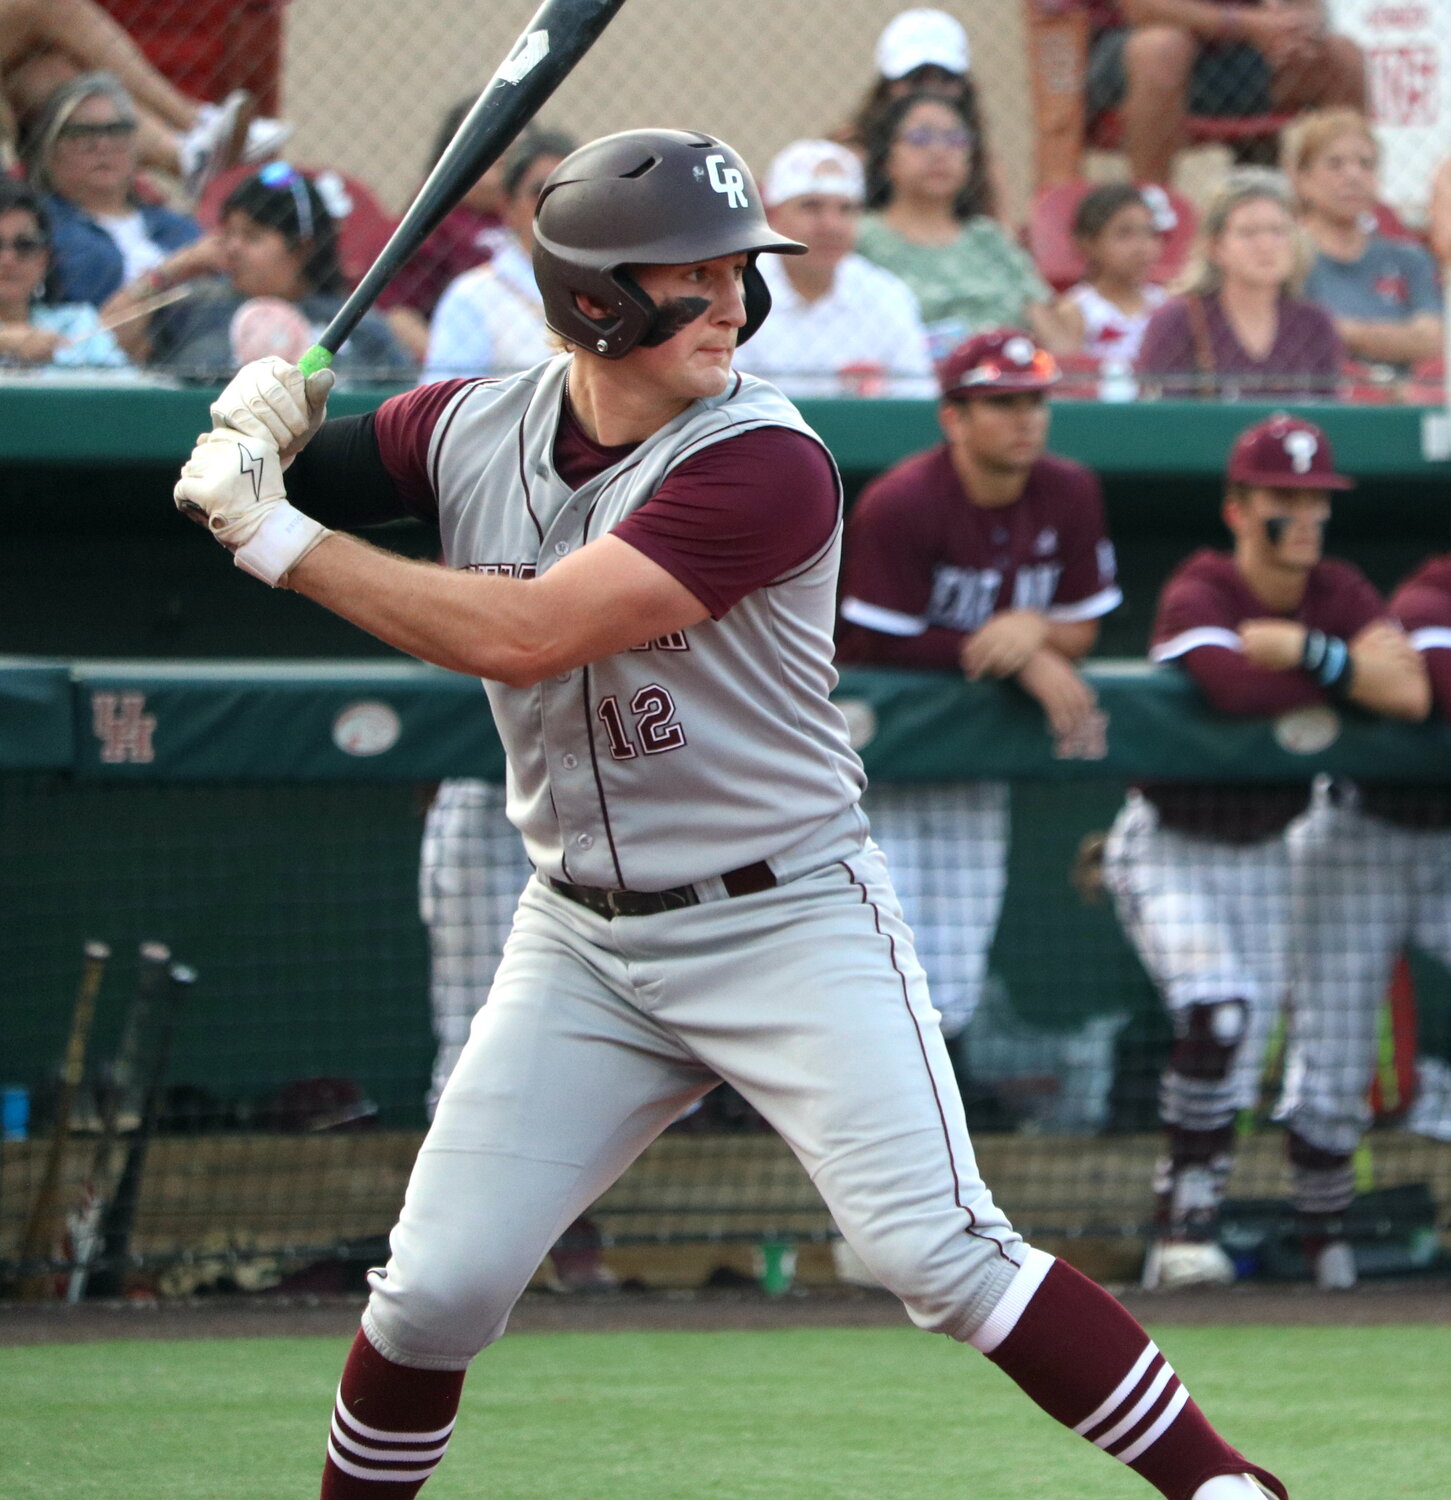 Gavin Rutherford hits during Friday's regional semifinal between Cinco Ranch and Pearland at The University of Houston.